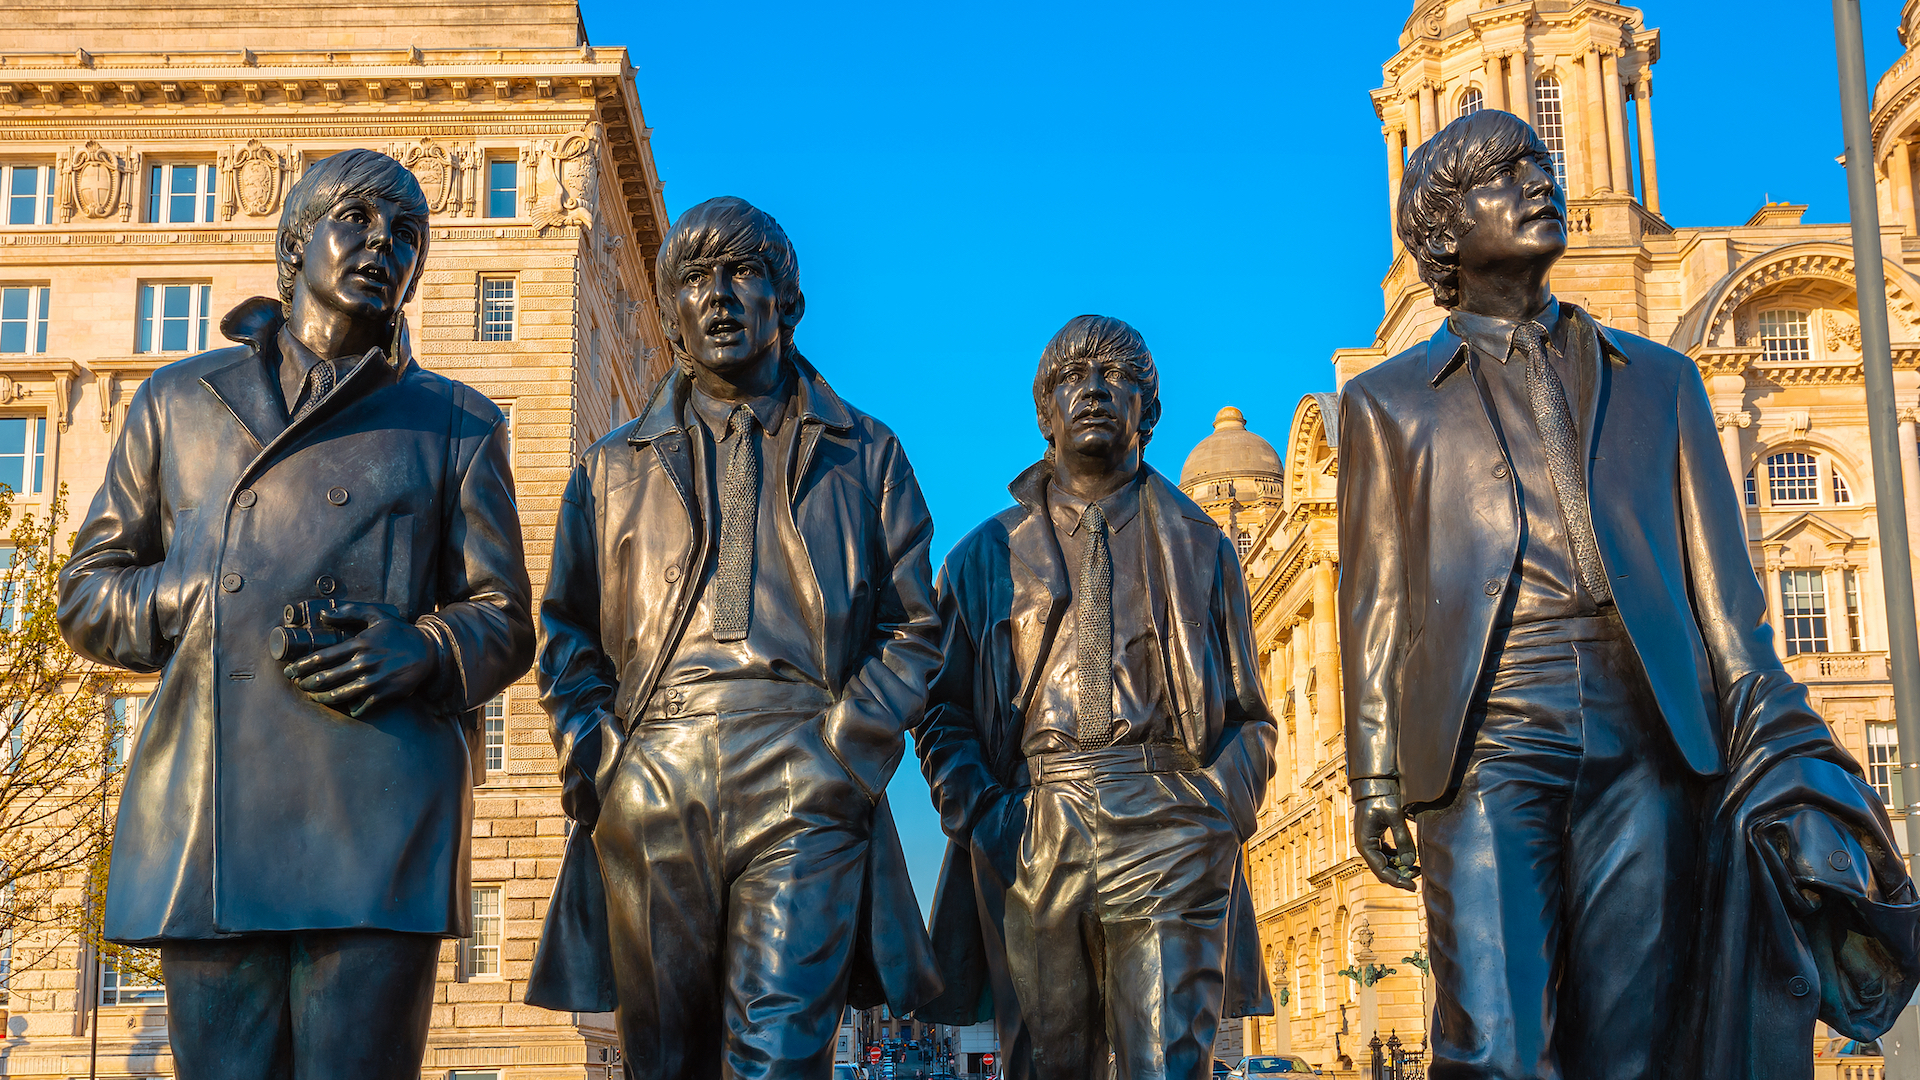 A statue of a band from Liverpool